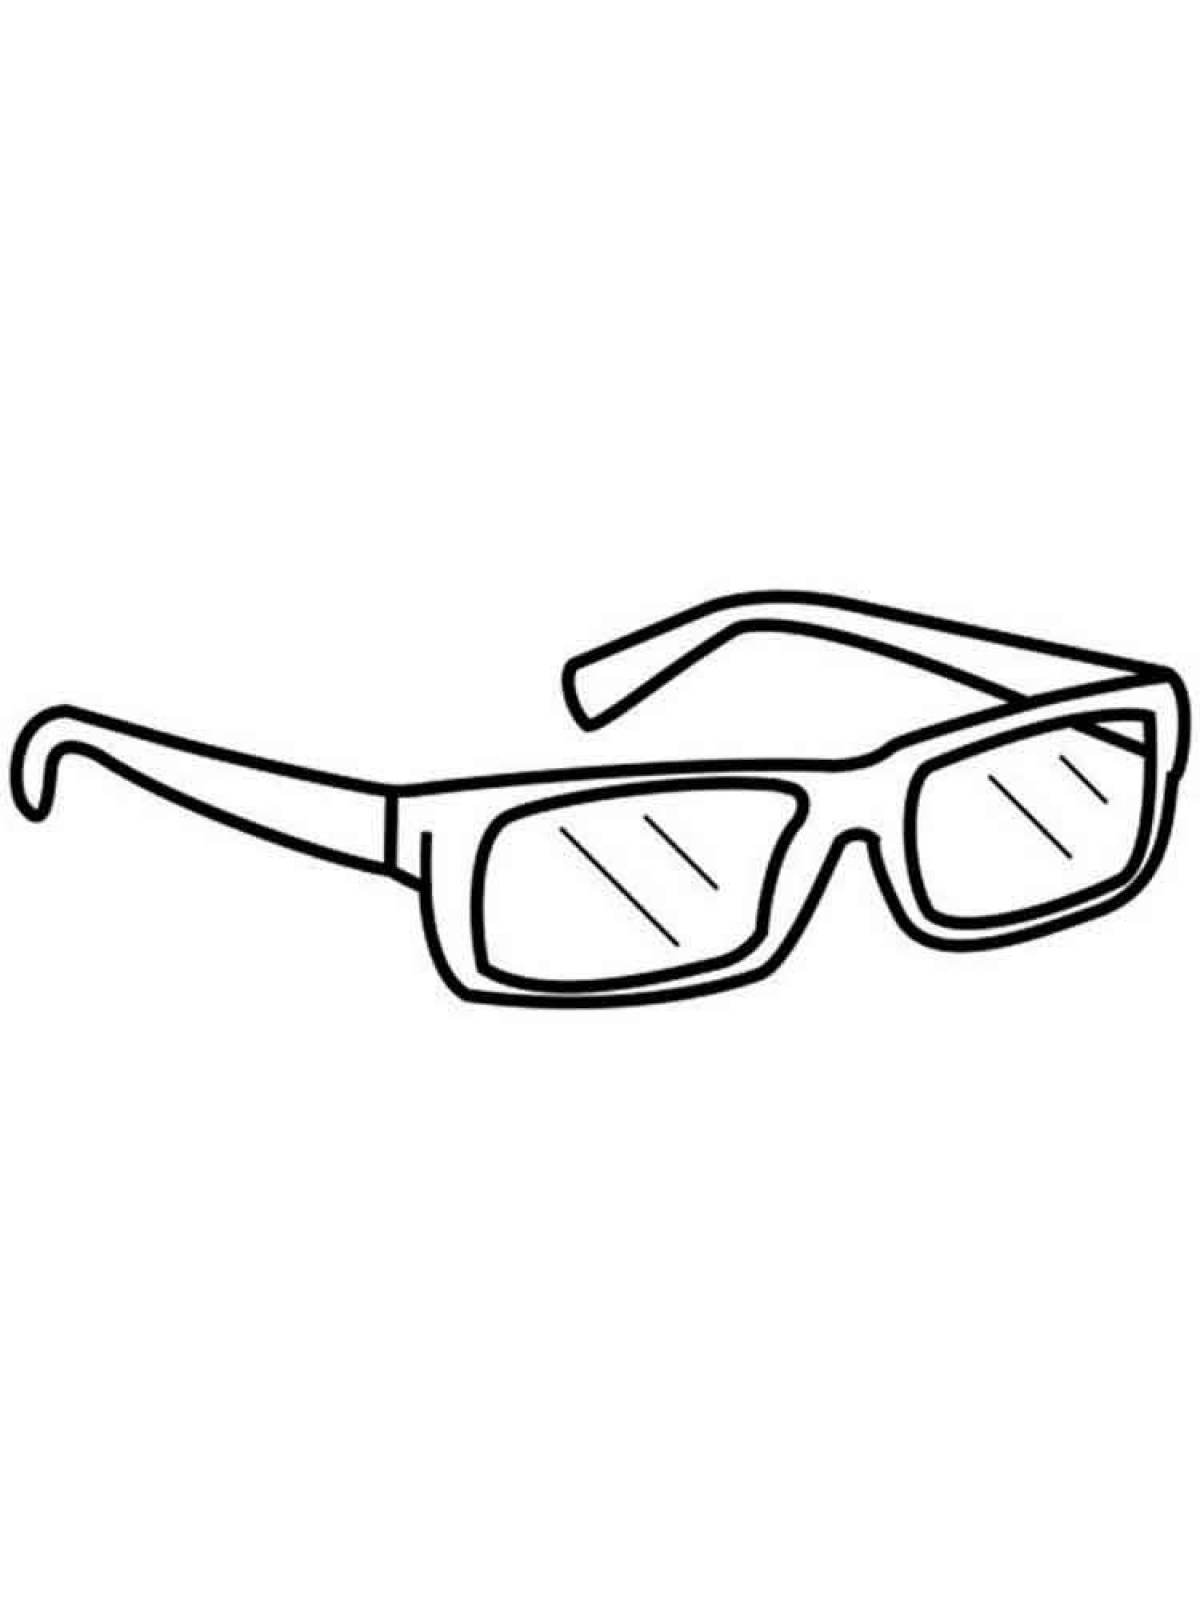 Flickering glasses for coloring